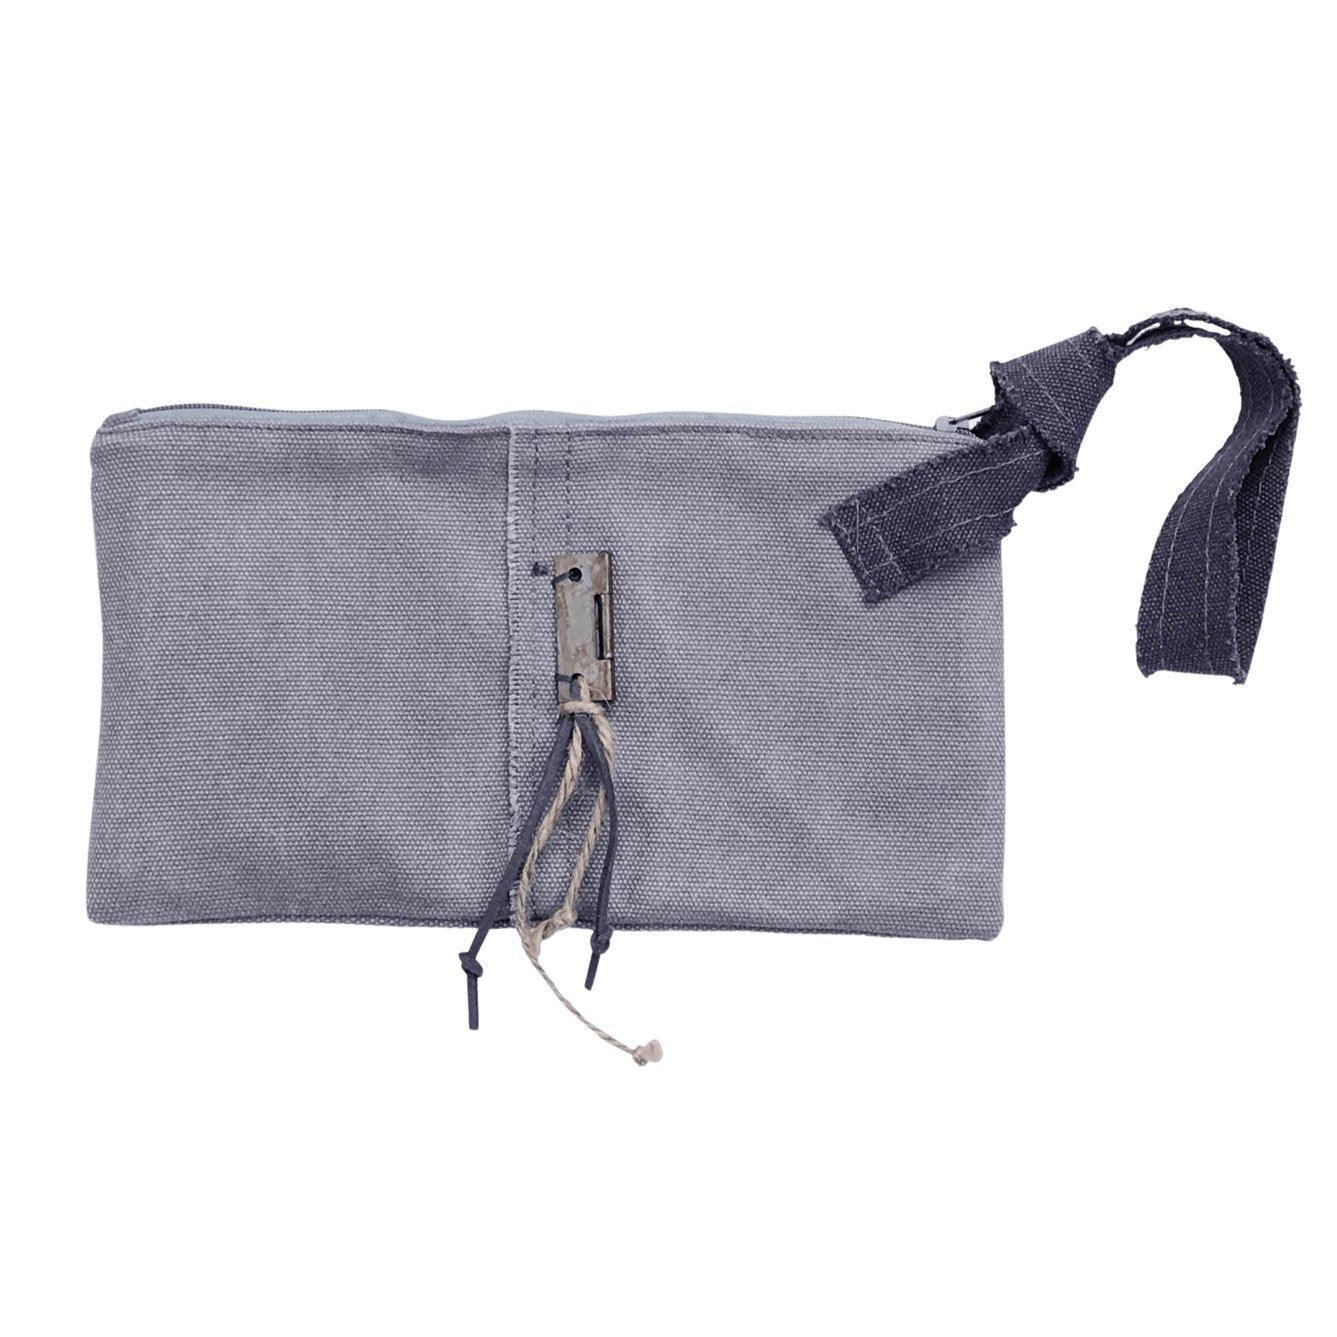 Grey Clutch With Strap - Sunshine and Grace Gifts